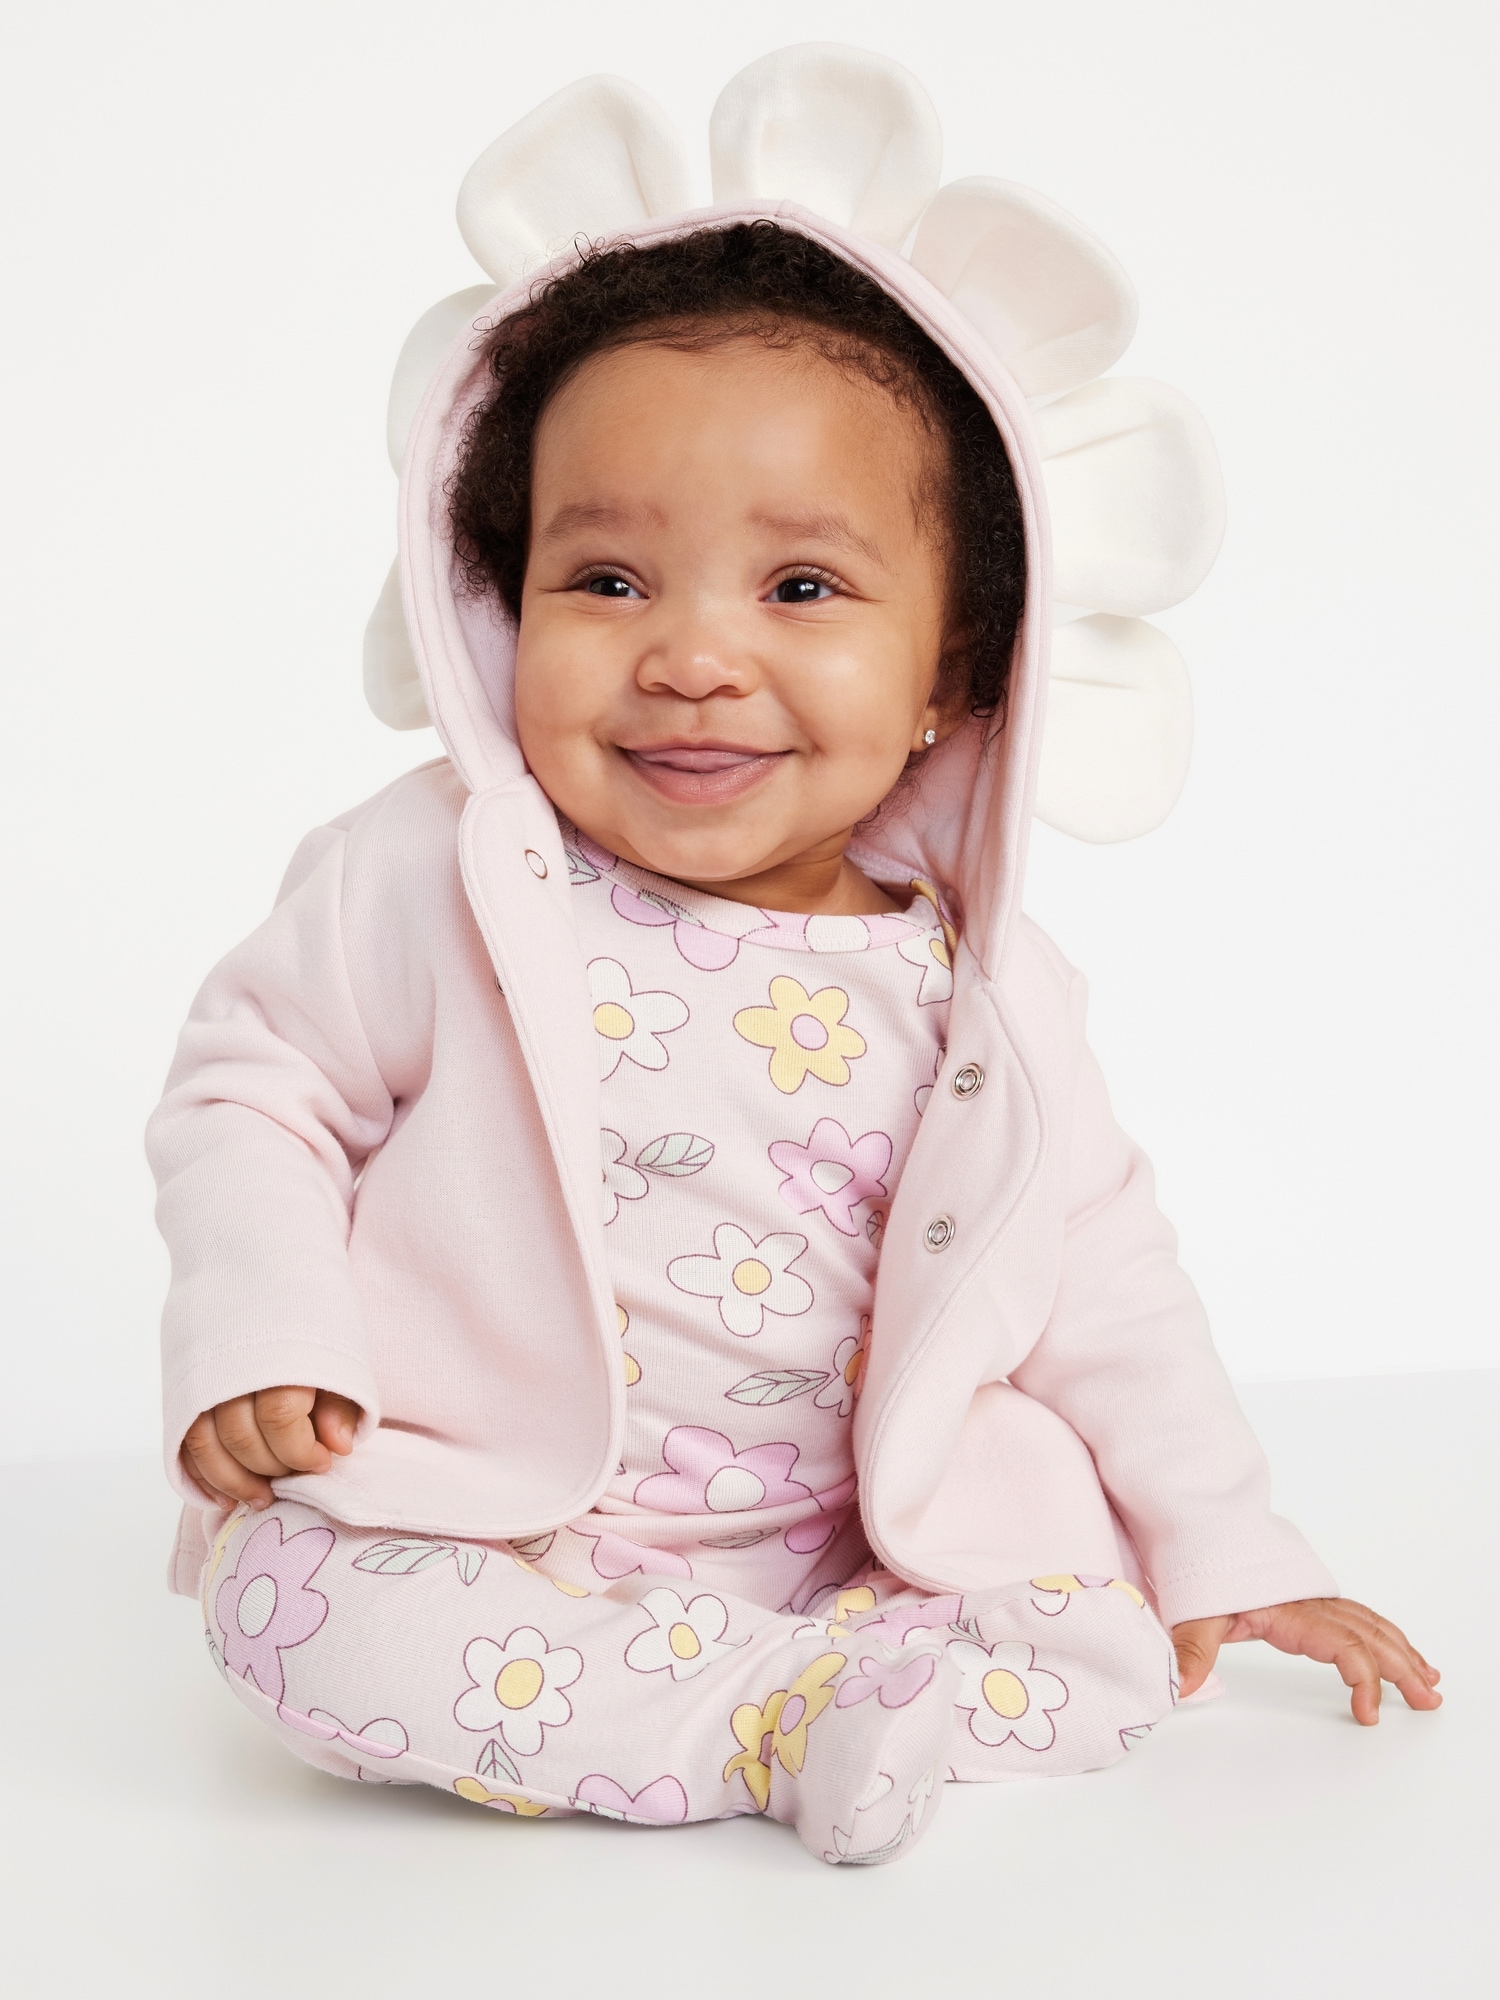 Unisex 3-Piece Floral-Print Layette Set for Baby Hot Deal